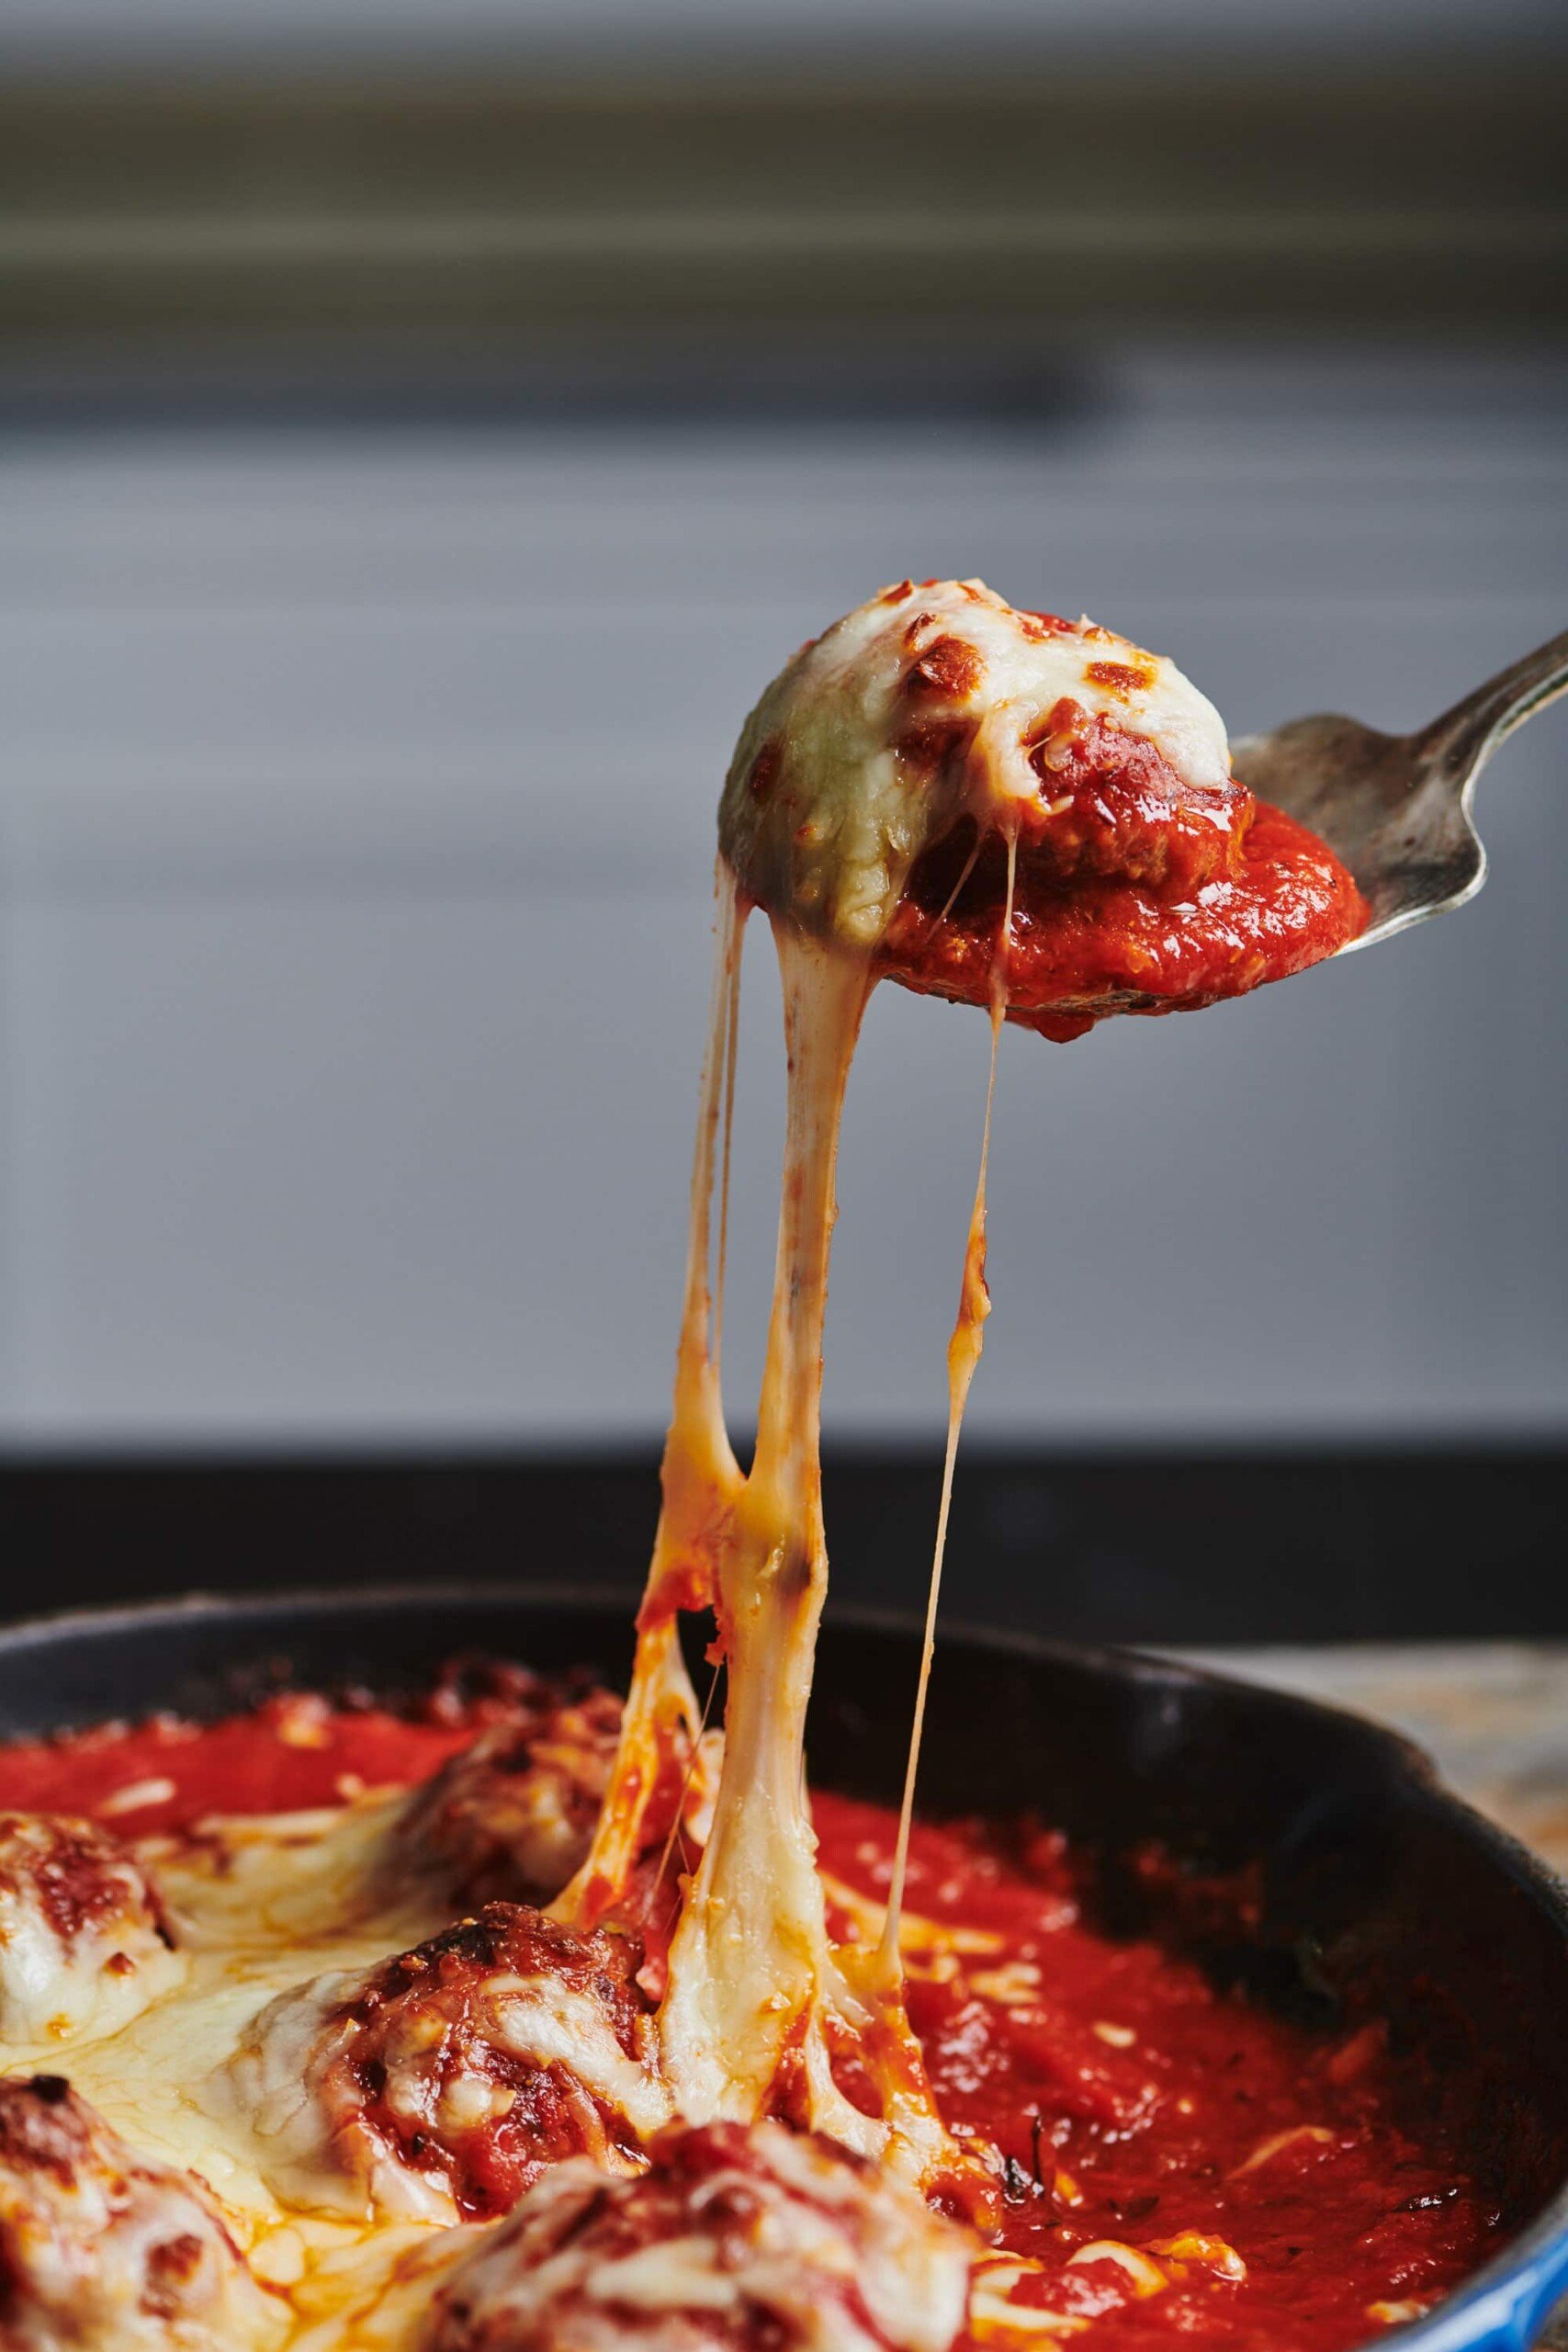 Spoon grabbing a Meatball with melted cheese.